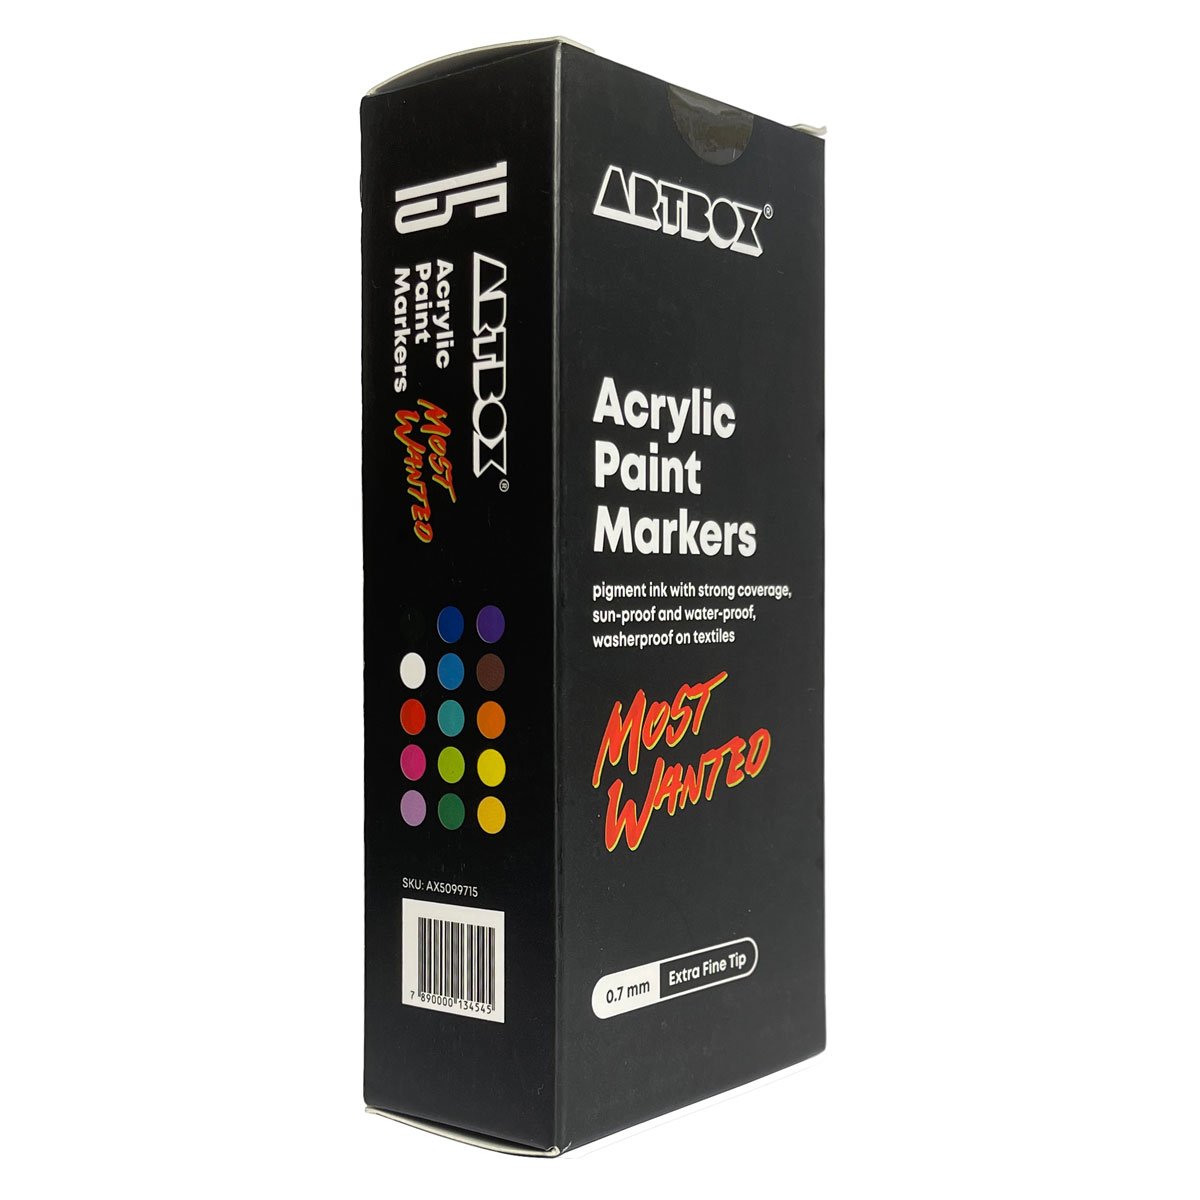 Set 15 markere - Acrylic Paint - Most Wanted, 1 mm | Artbox